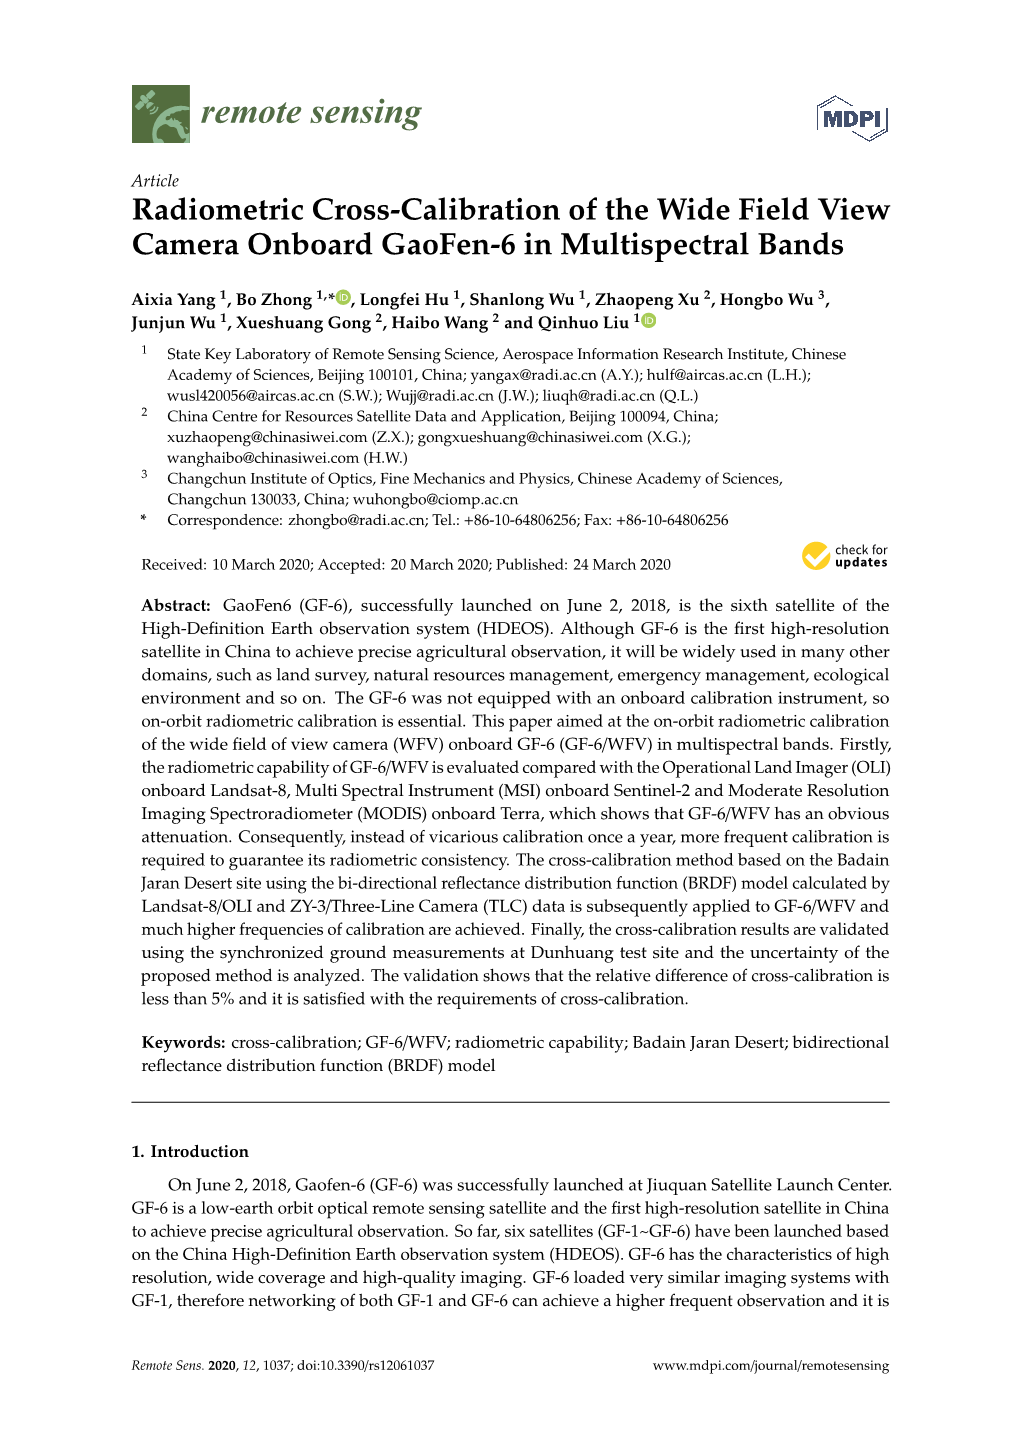 Radiometric Cross-Calibration of the Wide Field View Camera Onboard Gaofen-6 in Multispectral Bands